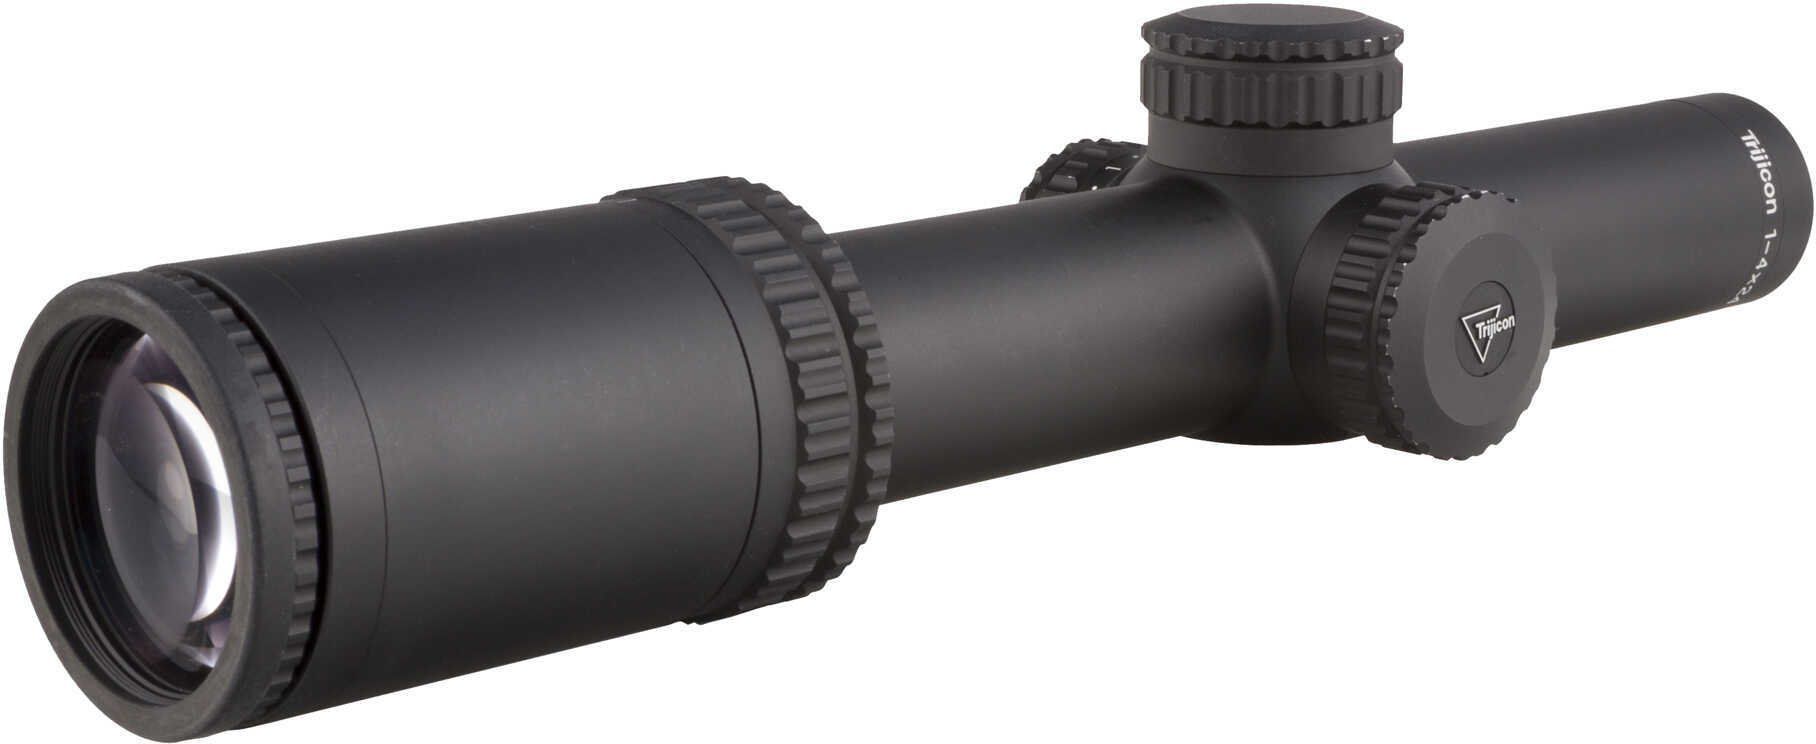 Trijicon AccuPower 1-4x24 MOA Crosshair, Green Led, 30mm Md: RS24-C-1900001